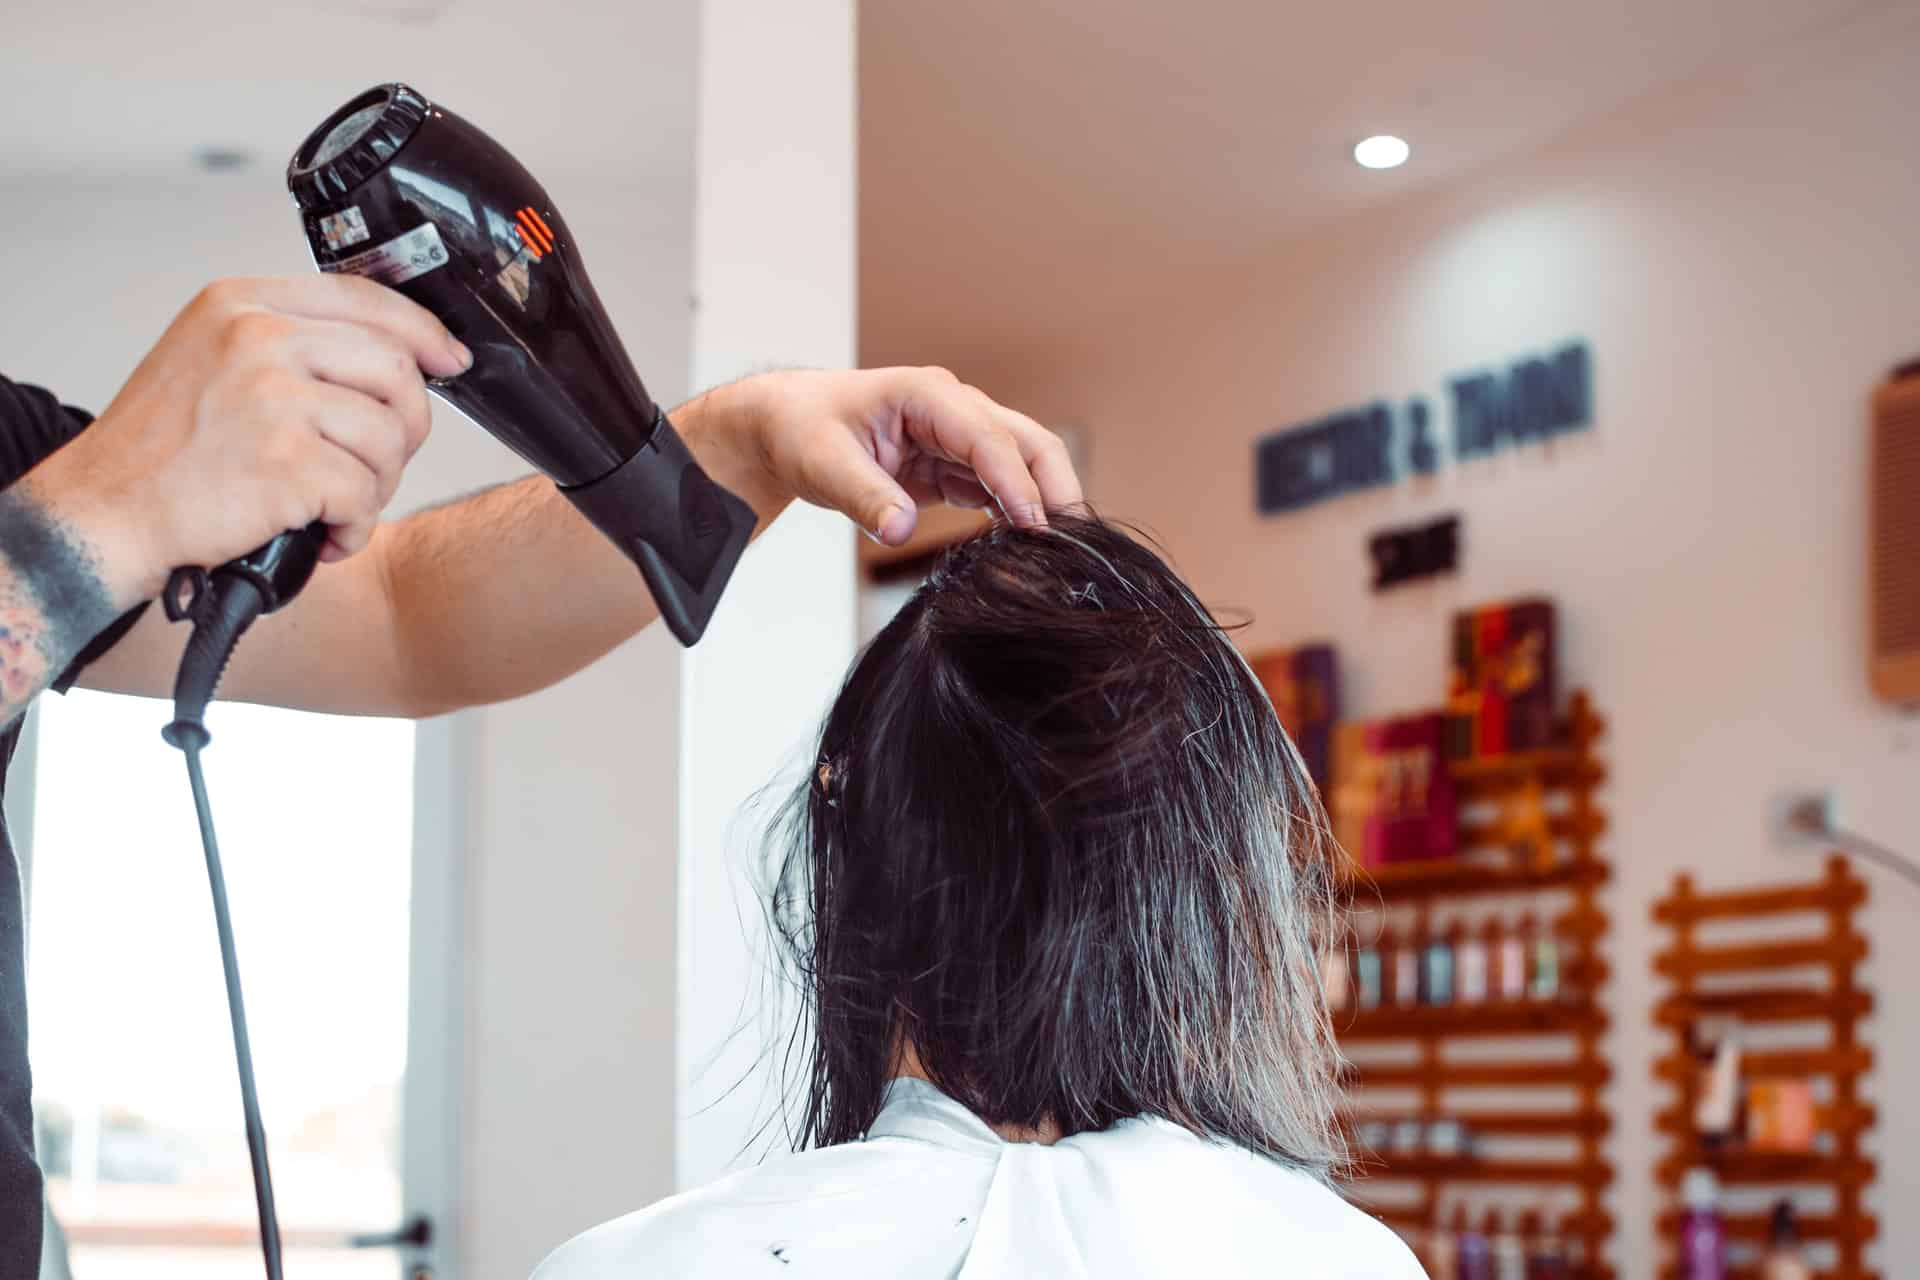 What should you consider when choosing a hair dryer?